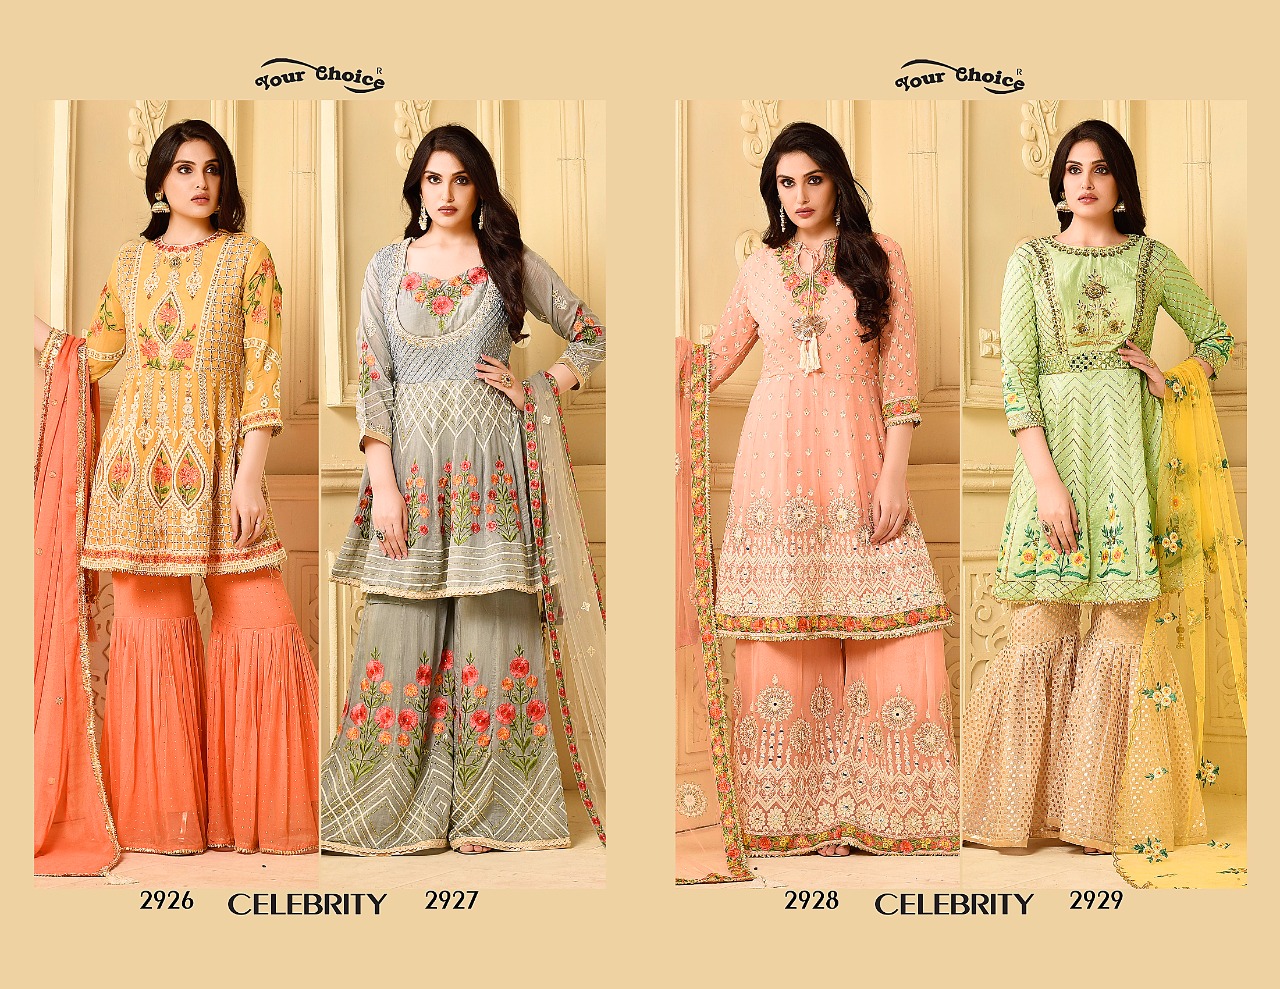 Your choice presents celebrity beautiful party wear new pattern sarara concept of salwar kameez